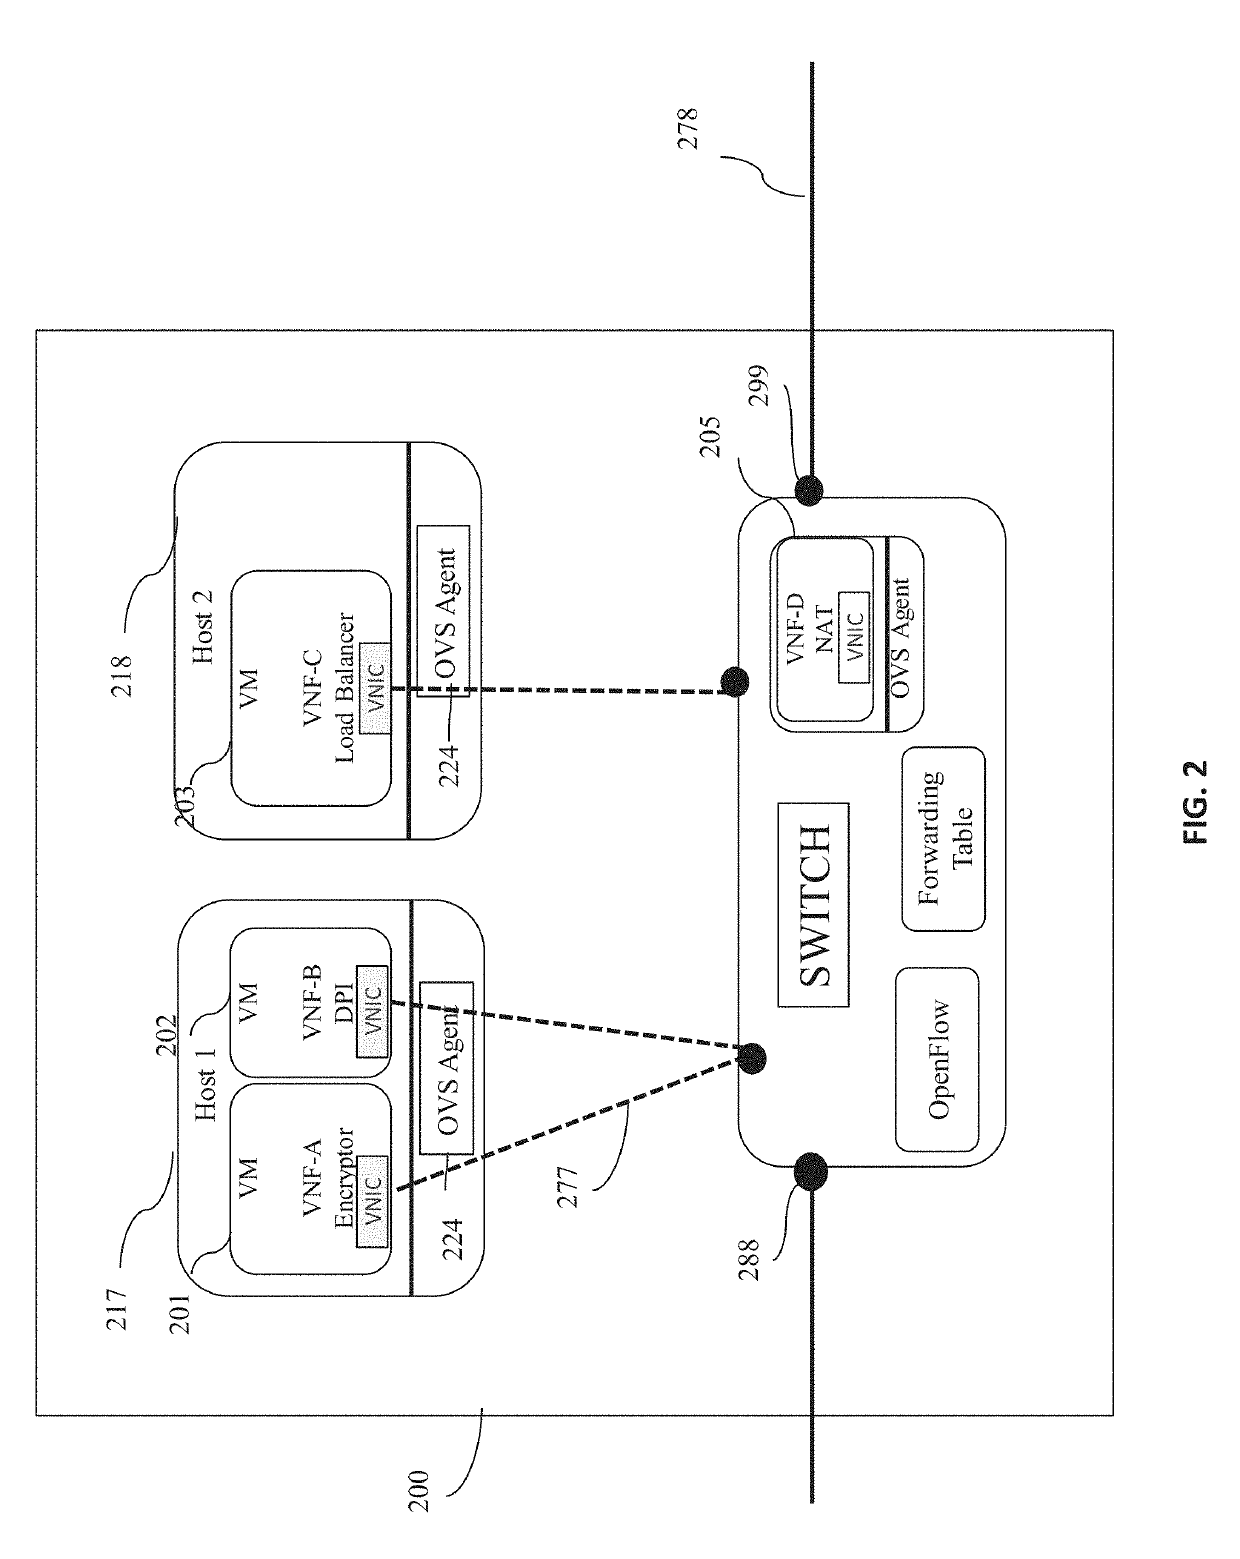 System and method for elastic scaling of virtualized network functions over a software defined network